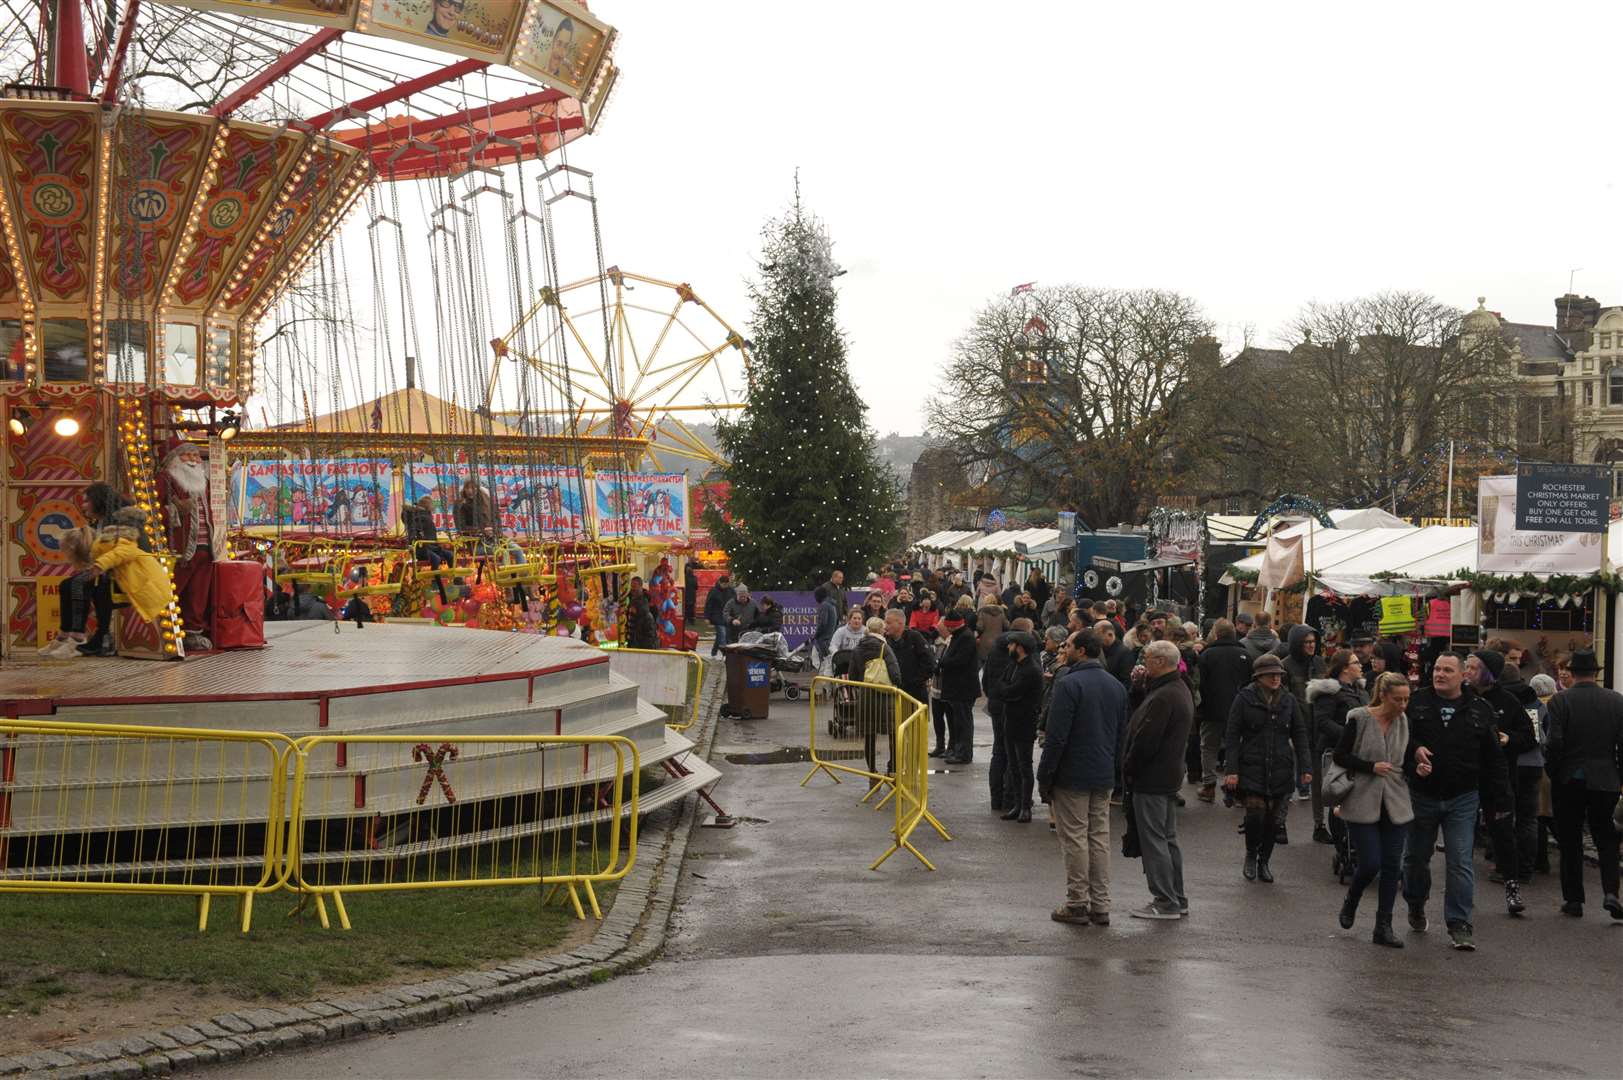 The market in the Castle's gardens included a funfair for visitors